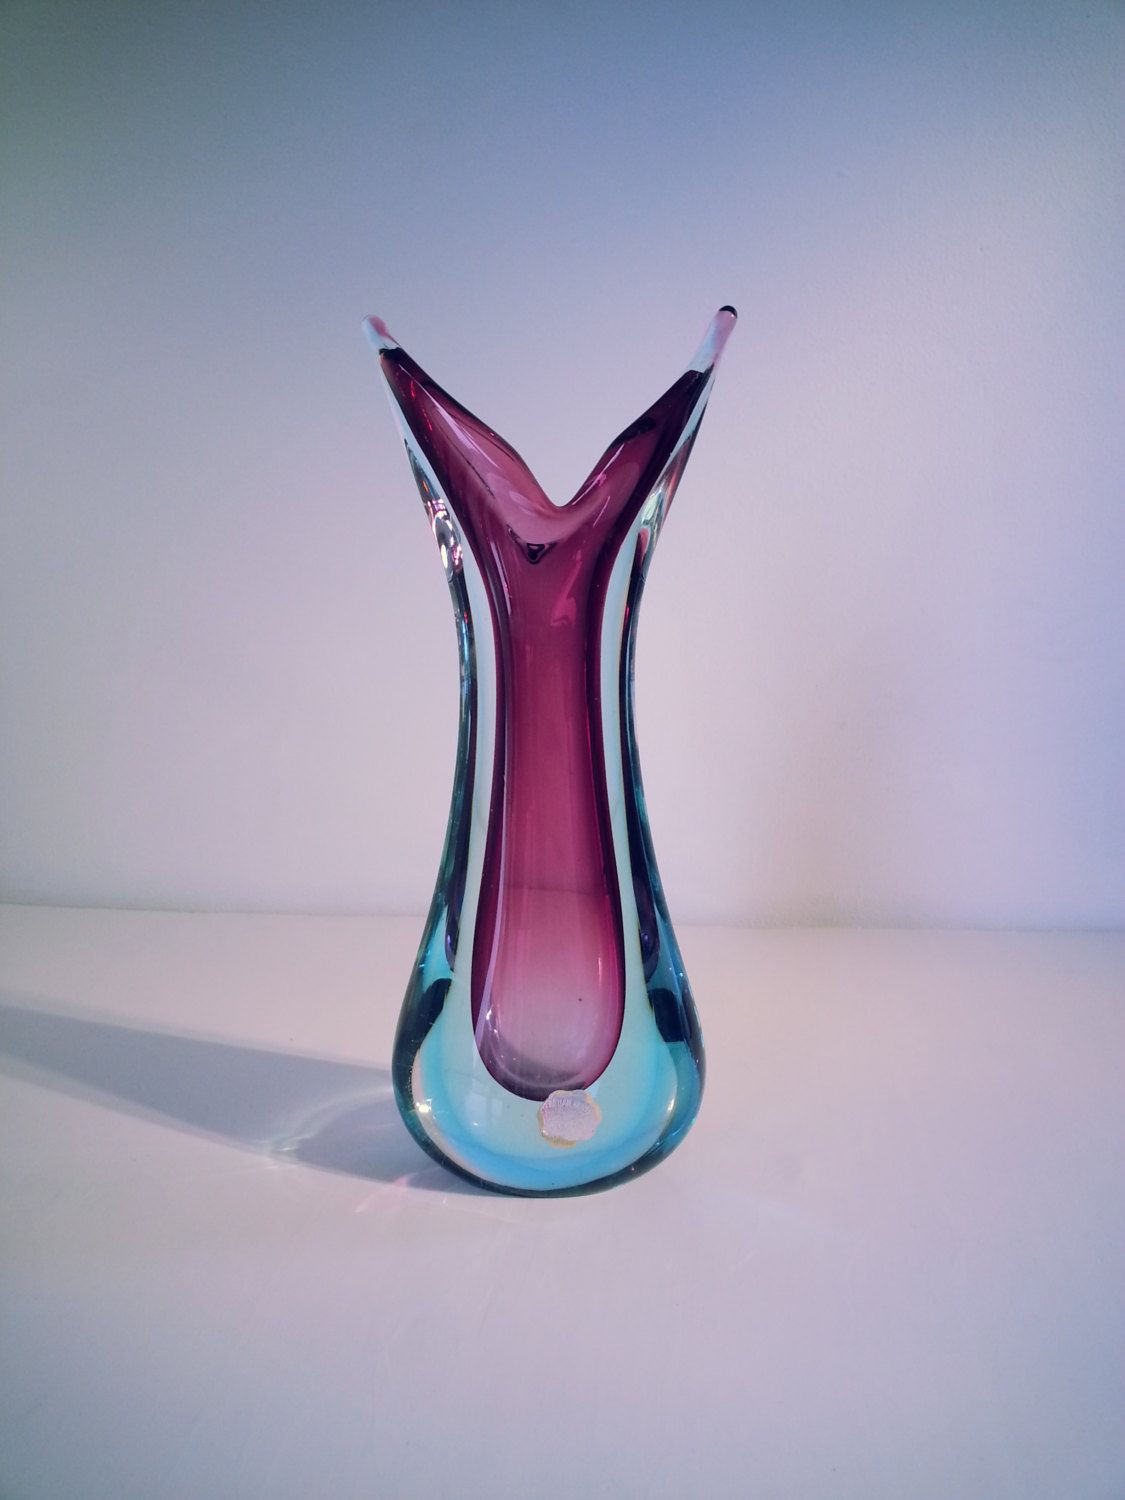 blue green glass vase of murano sommerso genuine venetian glass 1950s 1960s purple blue intended for murano sommerso genuine venetian glass 1950s 1960s purple blue glass vase pulled design vase made in italy by fcollectables on etsy